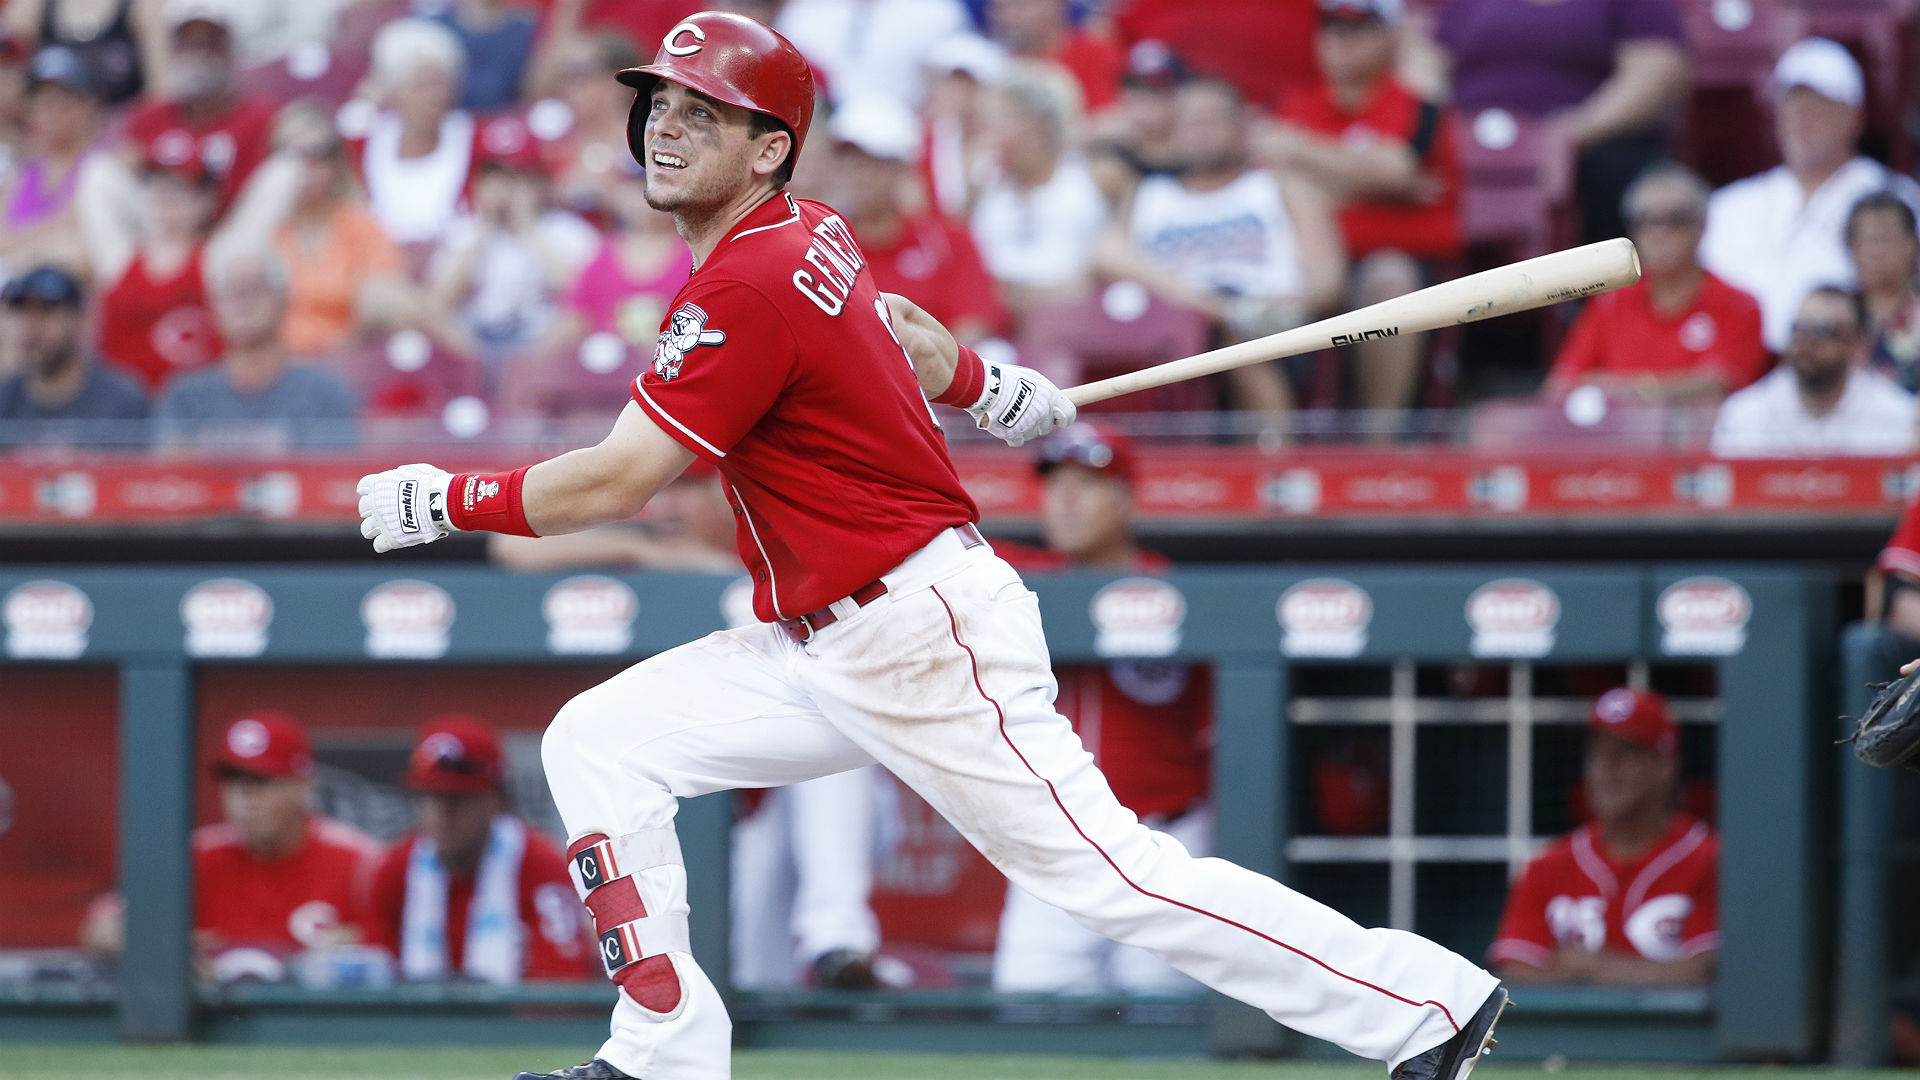 Reds All-Star second baseman is expected to miss 8-12 weeks with a right groin strain.